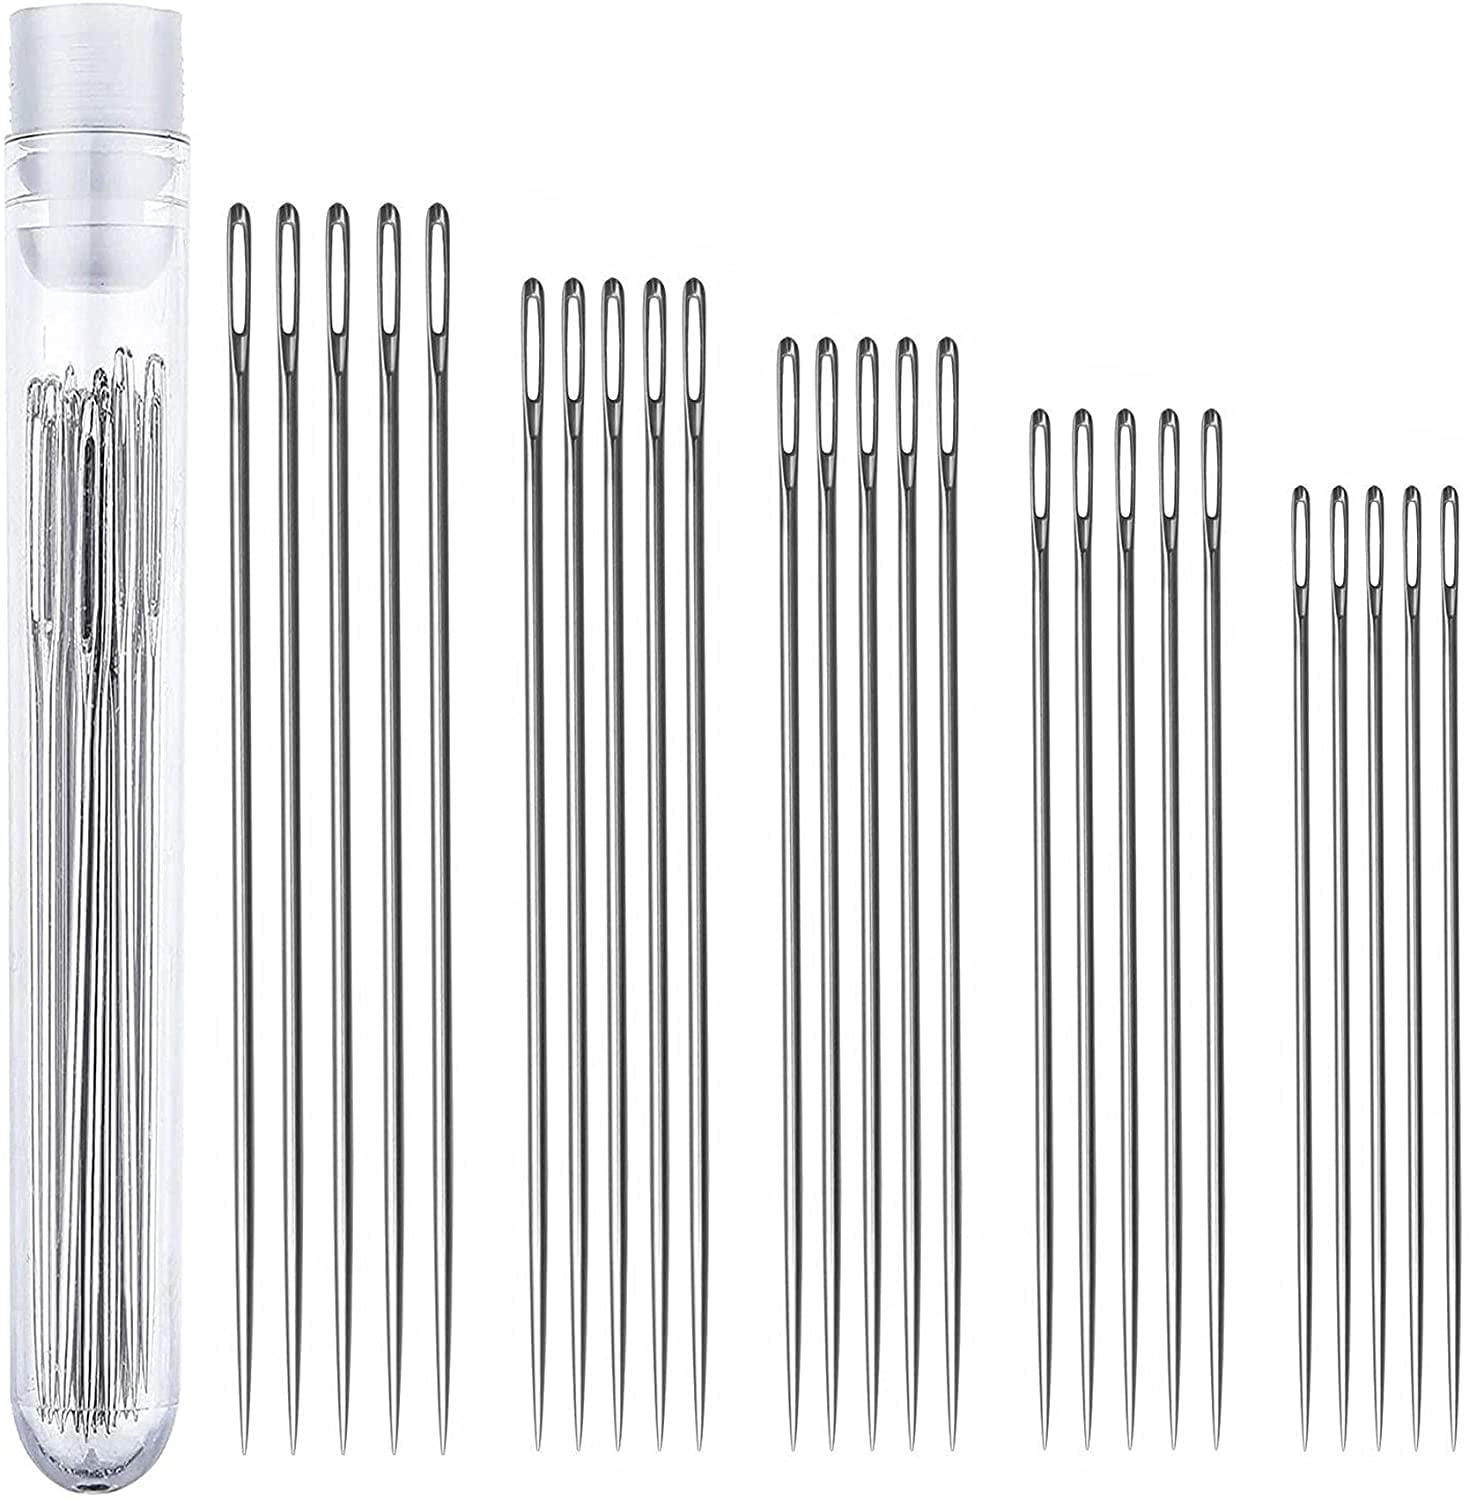 Needles Stitching Pins Gold 24 PCS One Second-Needles Big Eye Self-Threading Hand Needles Stitching Pins DIY Sewing Household Darning Needles for Elderly People 